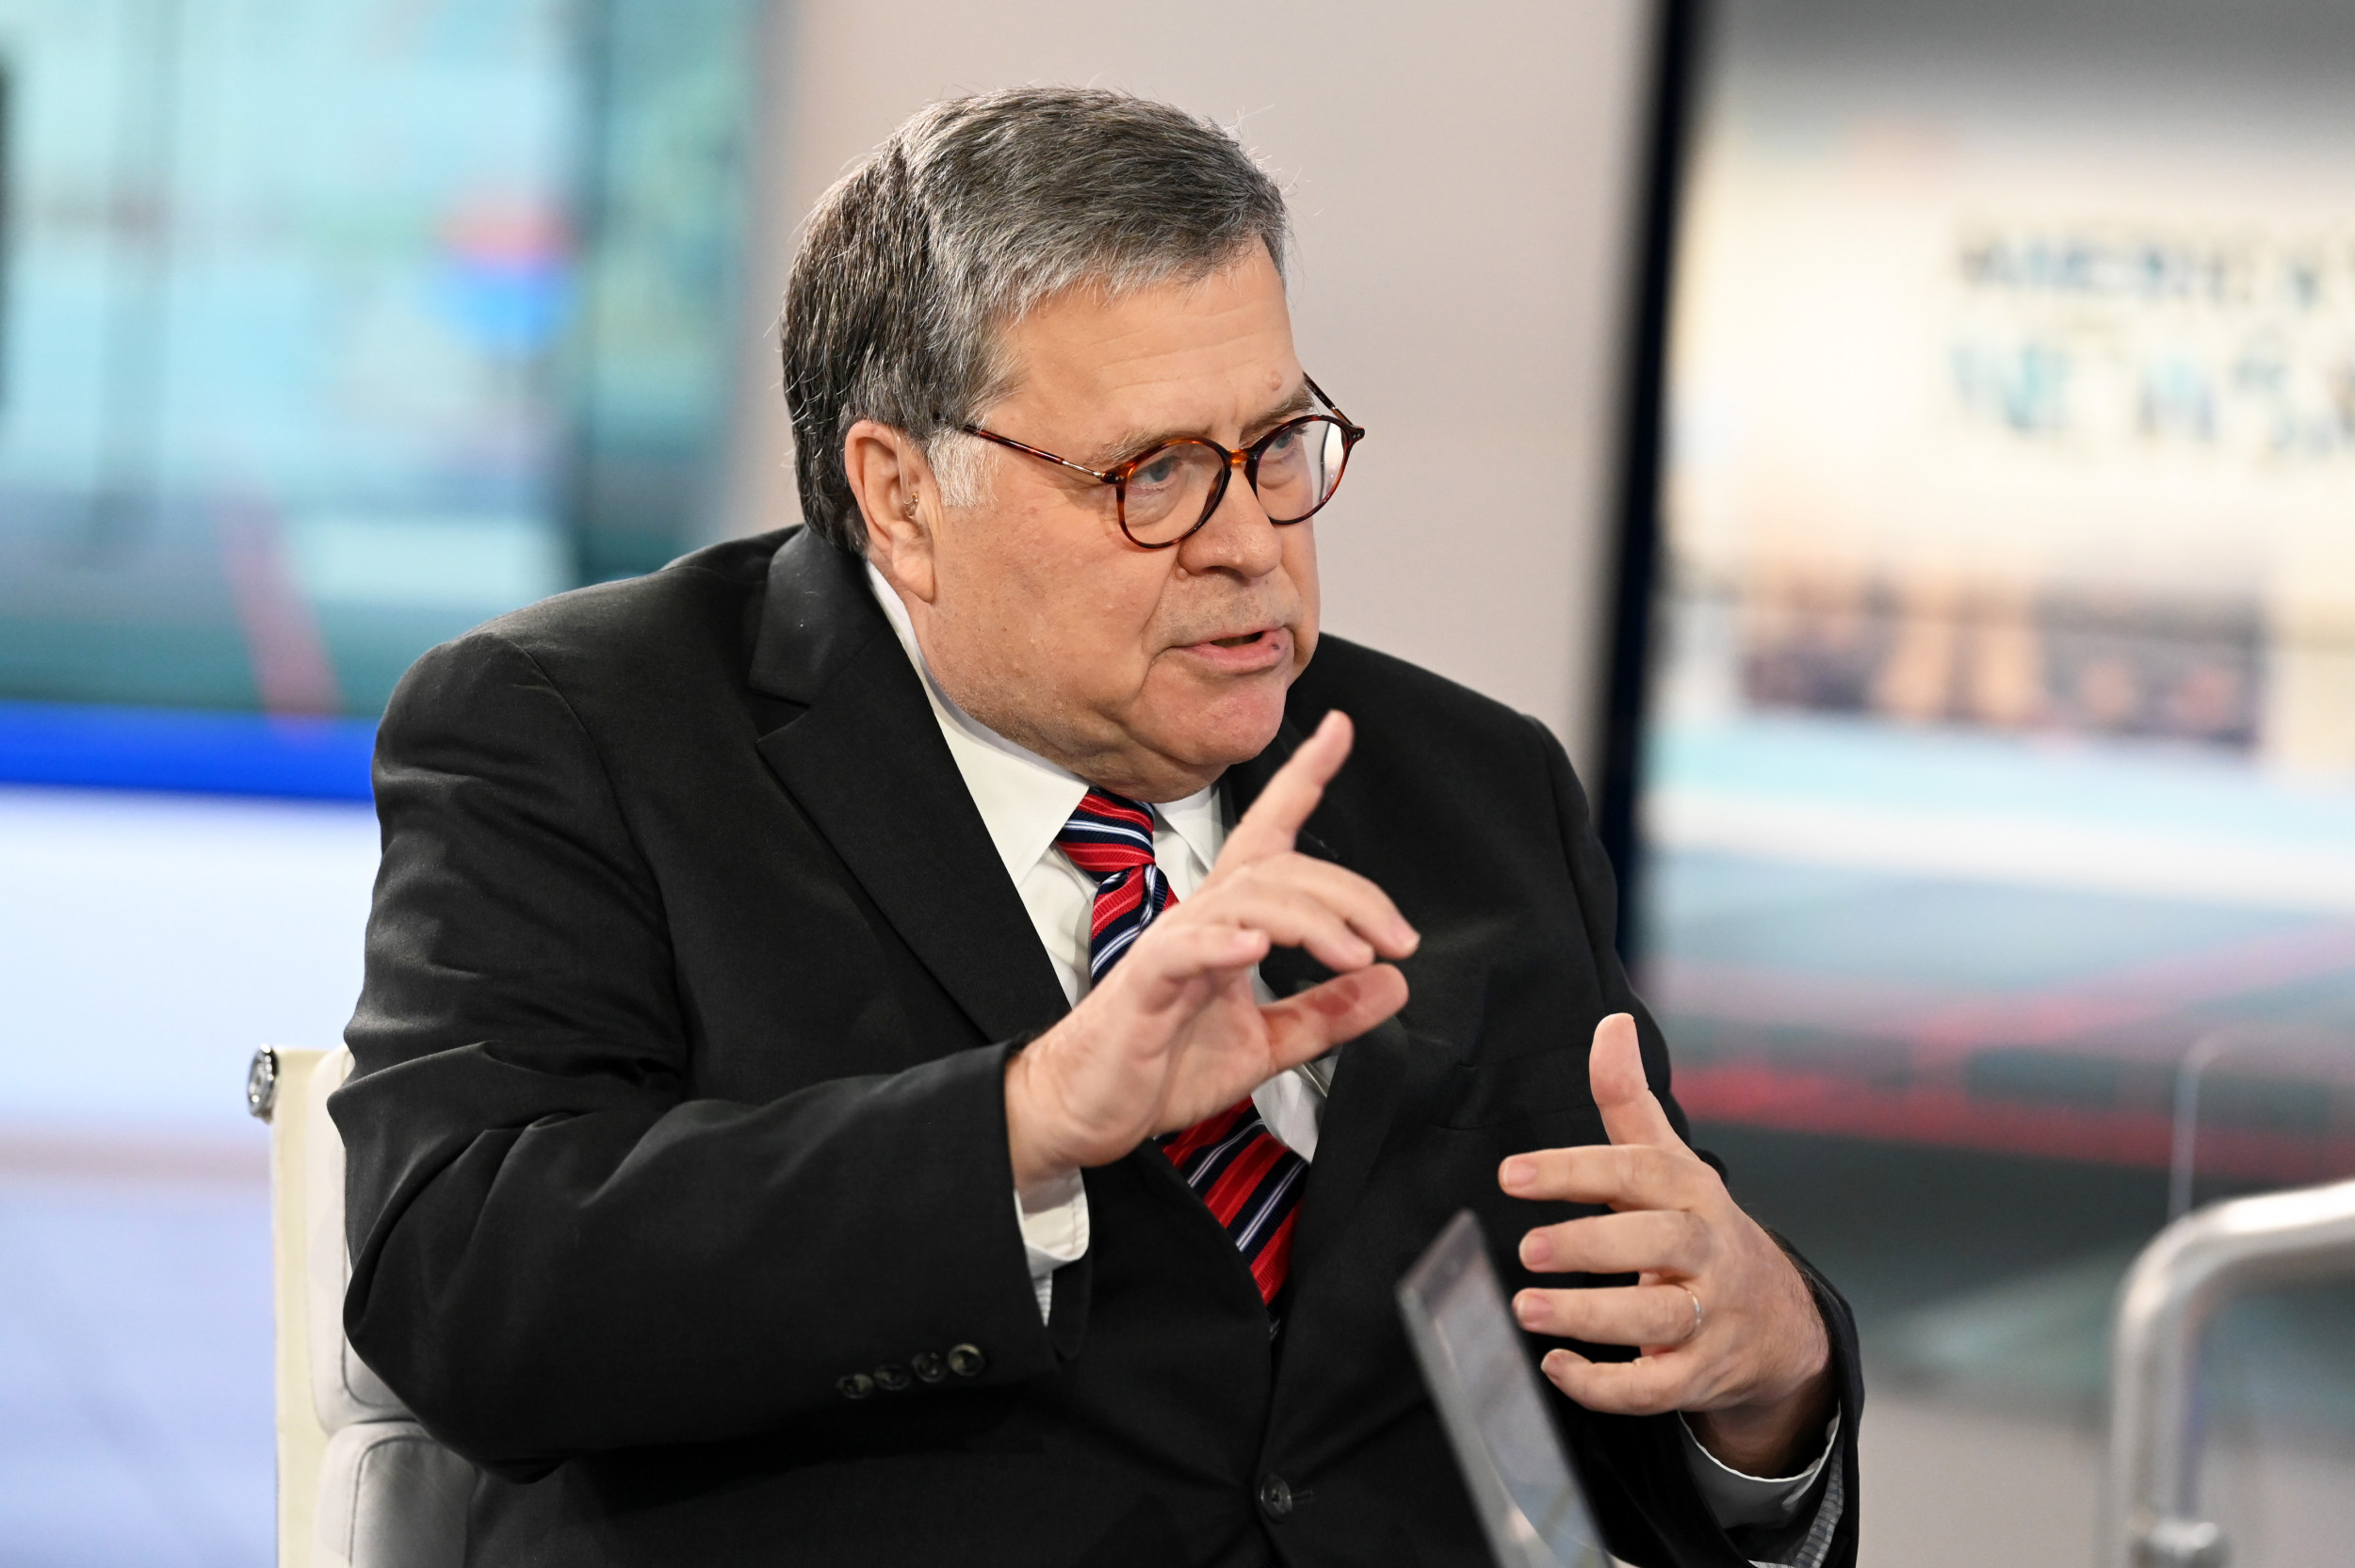 Bill Barr would be “implicated” in Trump’s “crimes”: Michael Cohen